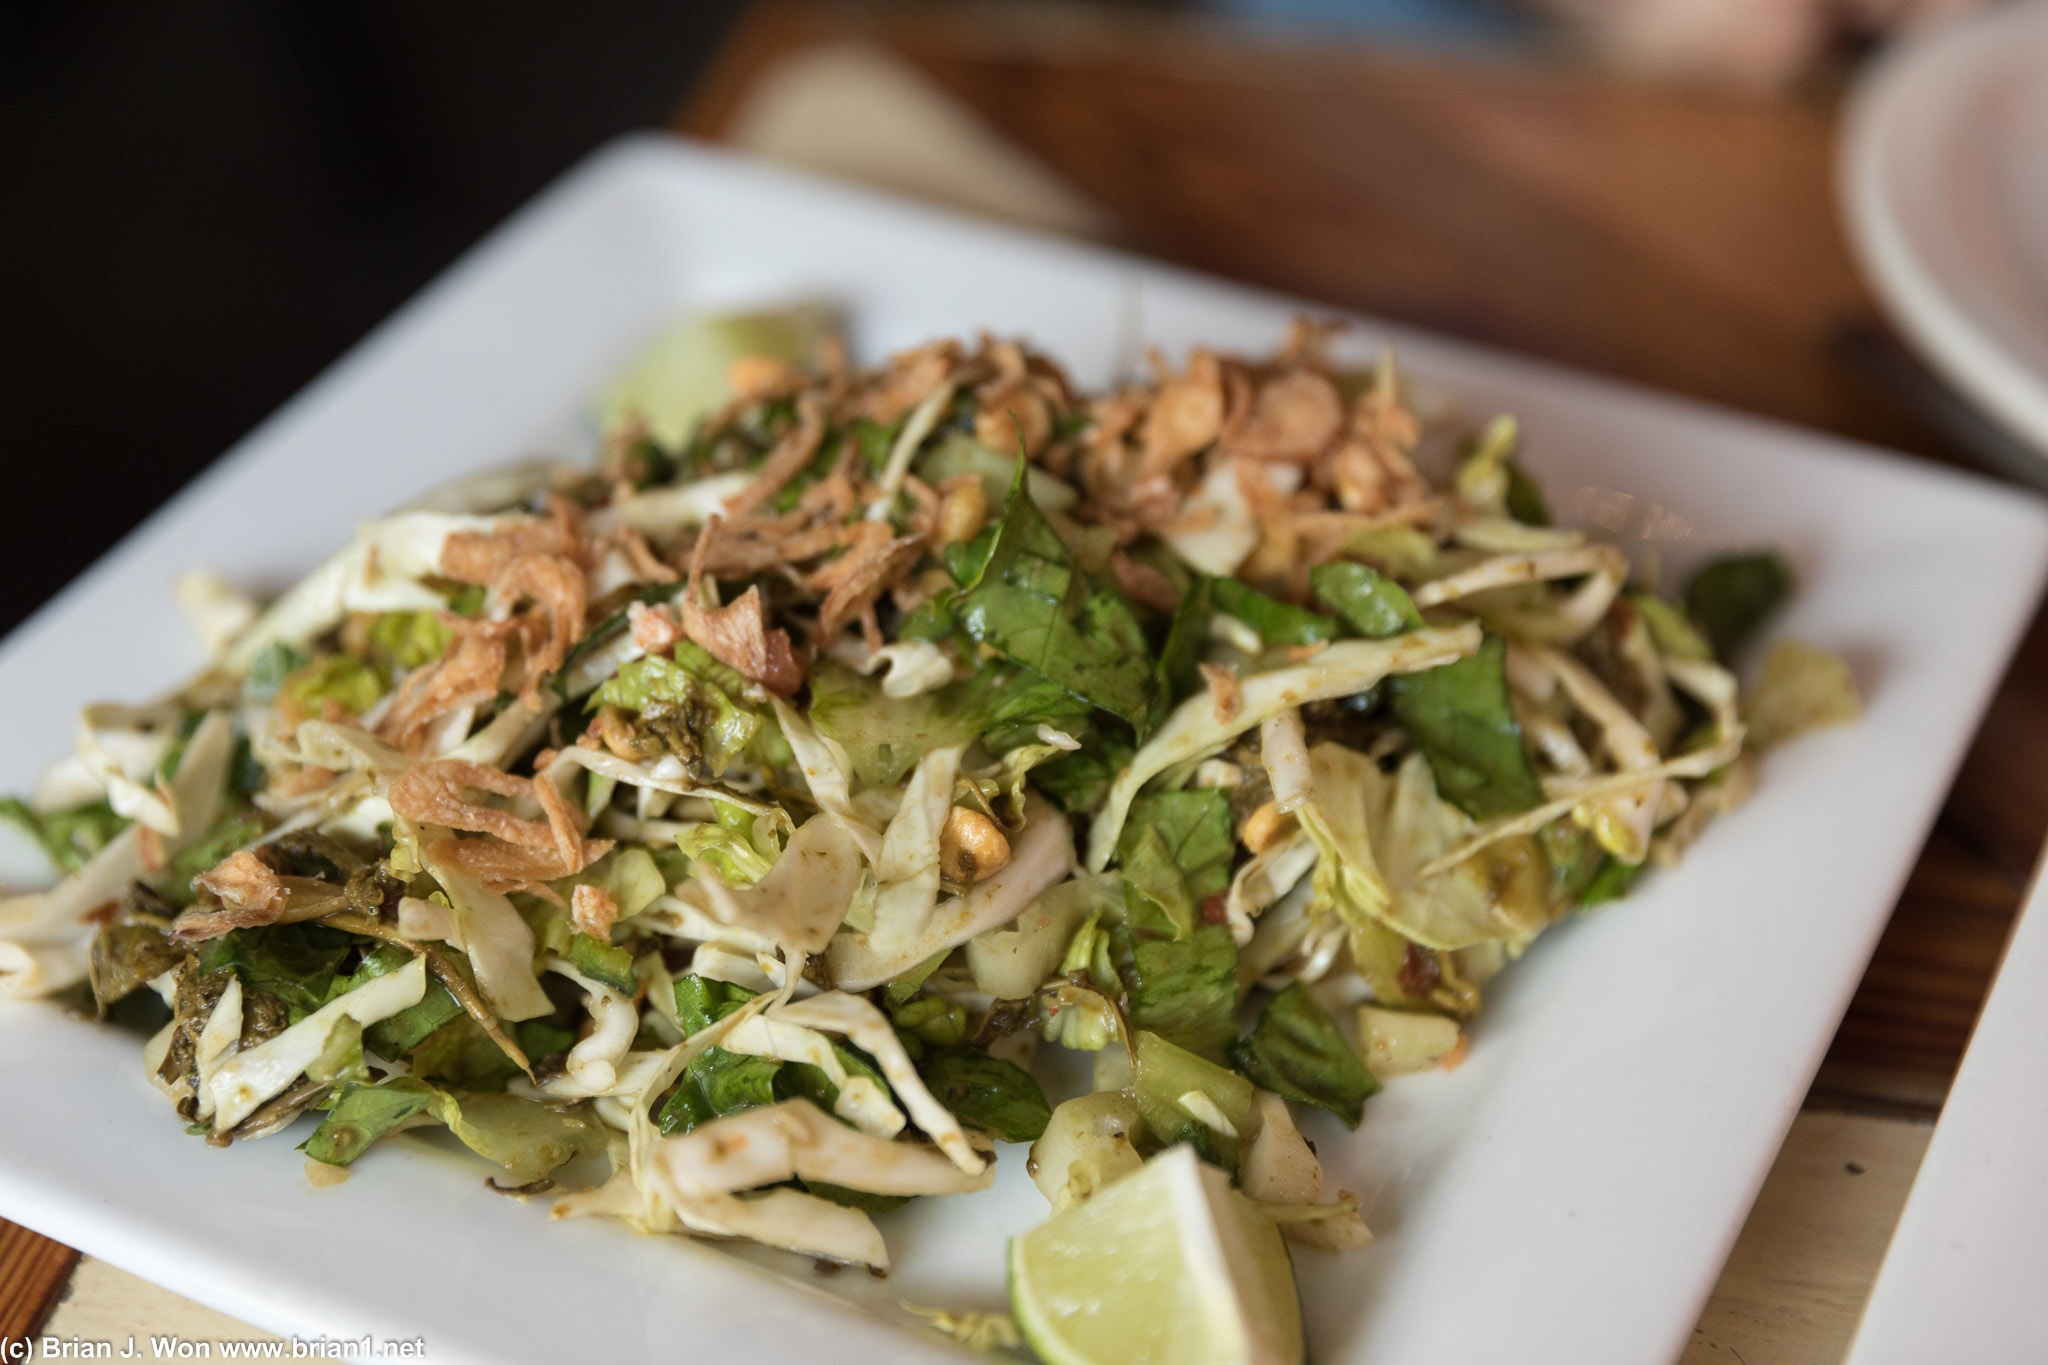 Burmese tea leaf salad. Not authentic (too much cabbage) but refreshing all the same.